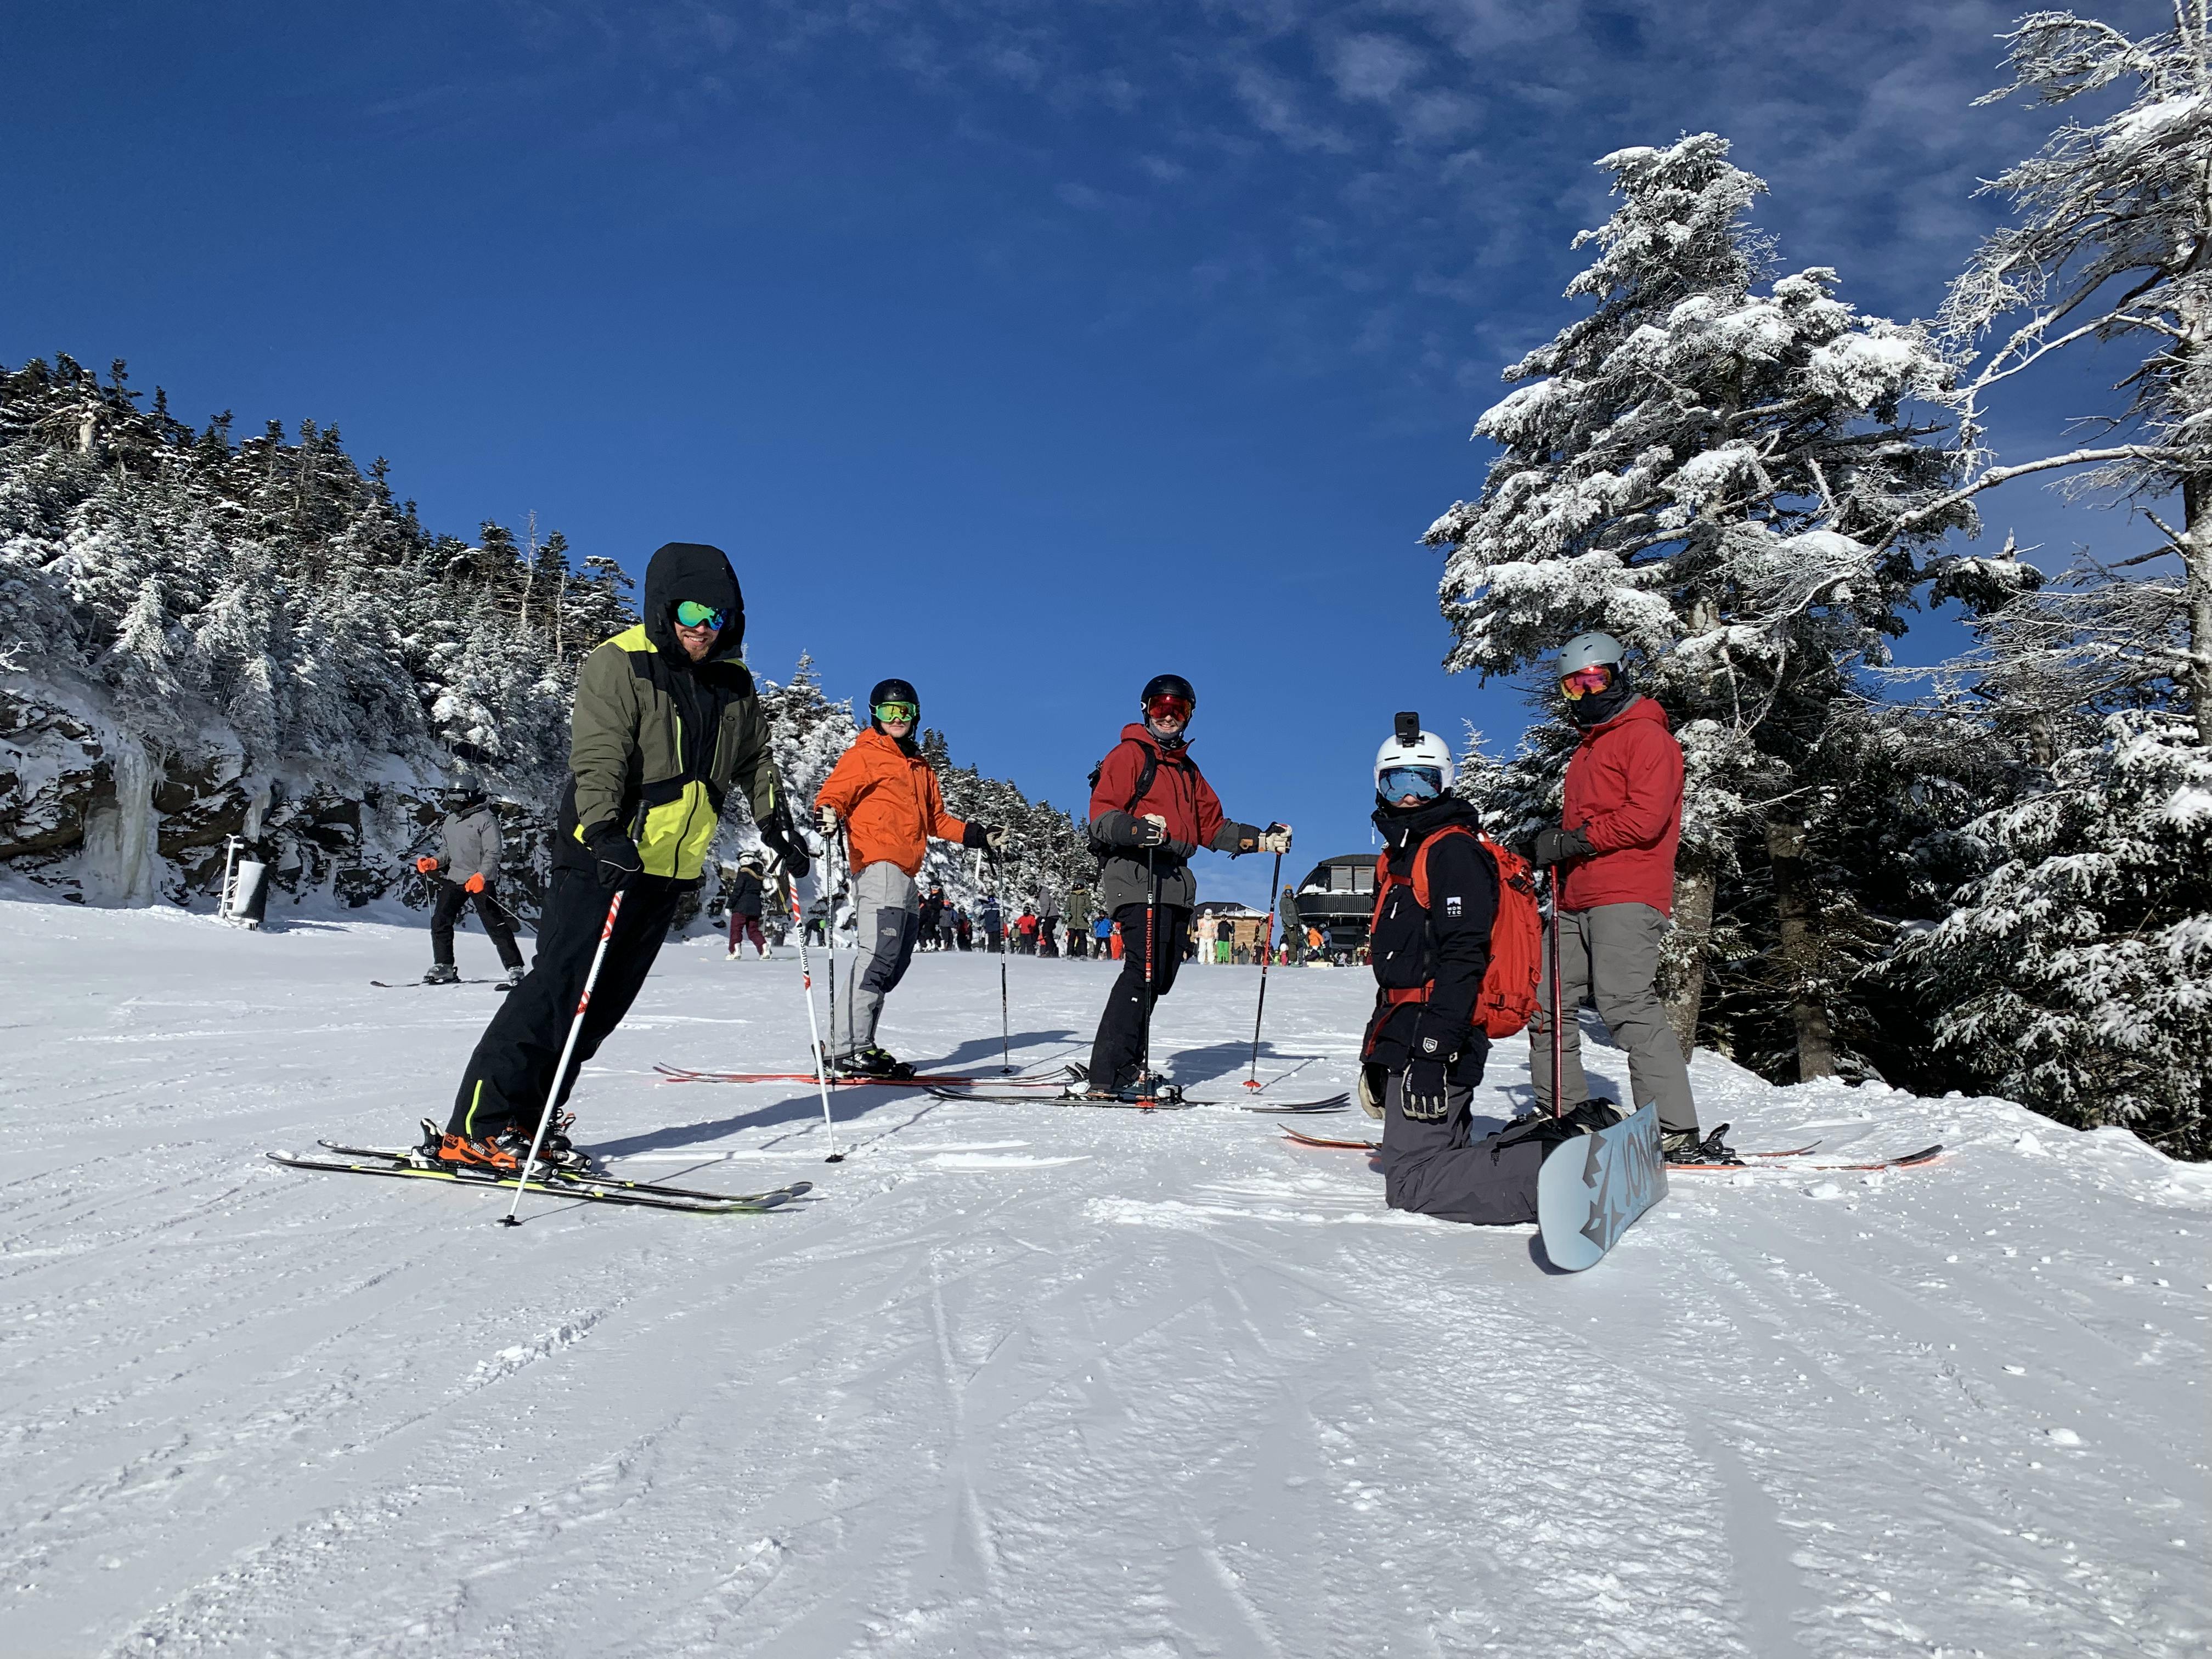 Several skier and snowboarders on a ski run. 